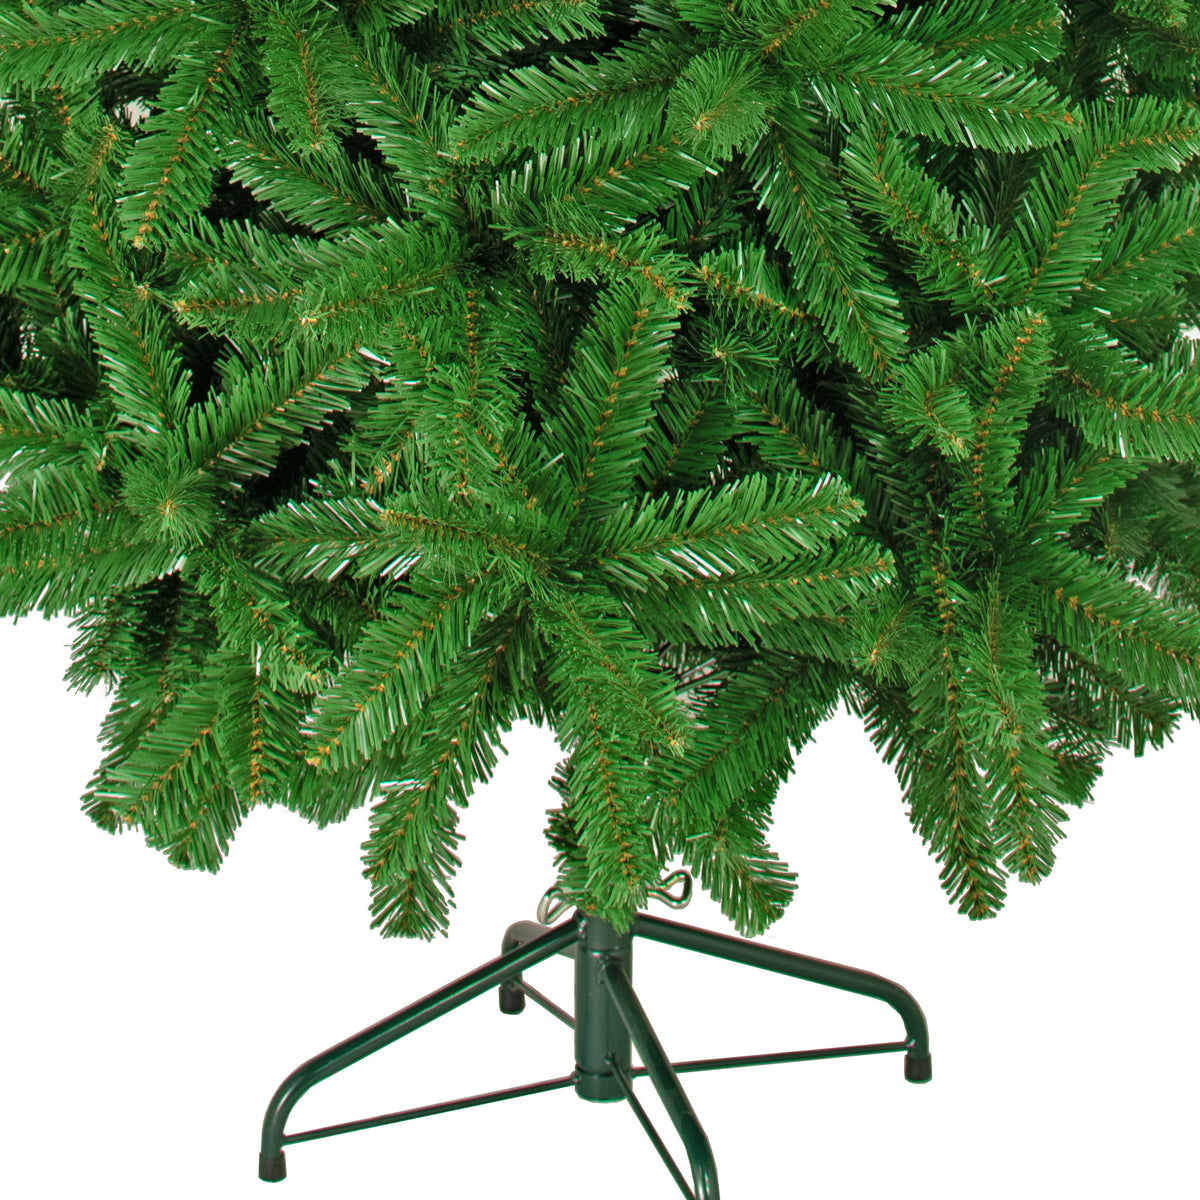 Stand Included:  The Luxe Virginia Pine Tree comes with a Green metal base.   Ships all together in one box.